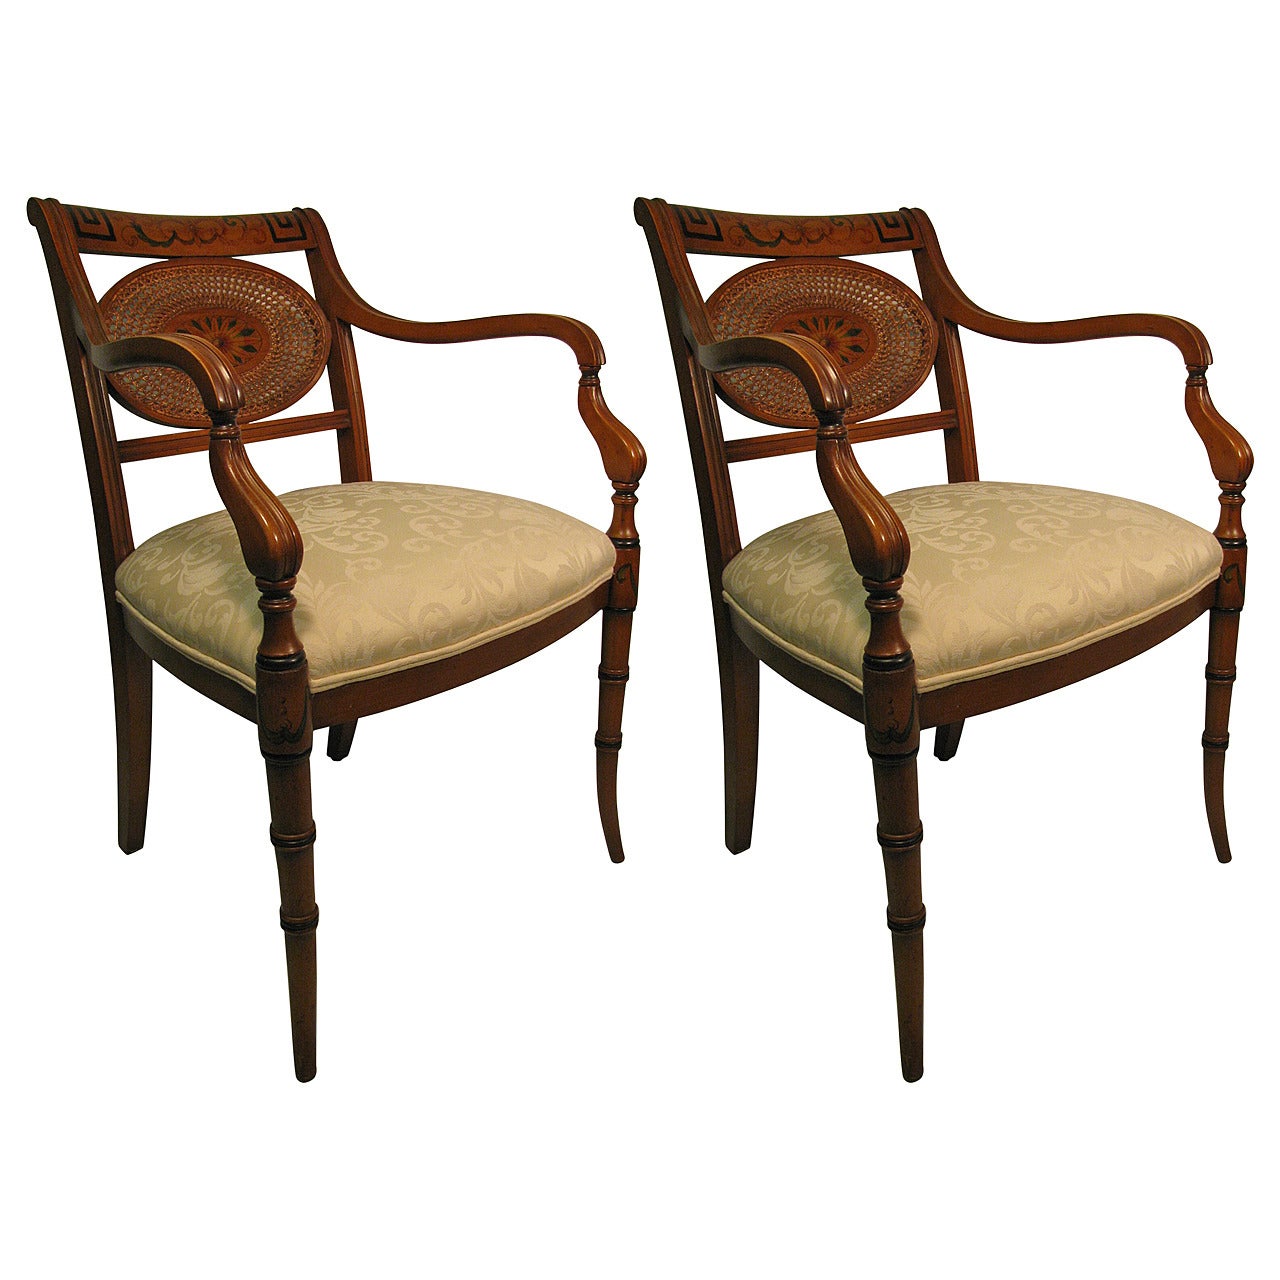 Pair of Adams Style Caned Back with Damask Upholstered Seat Armchairs